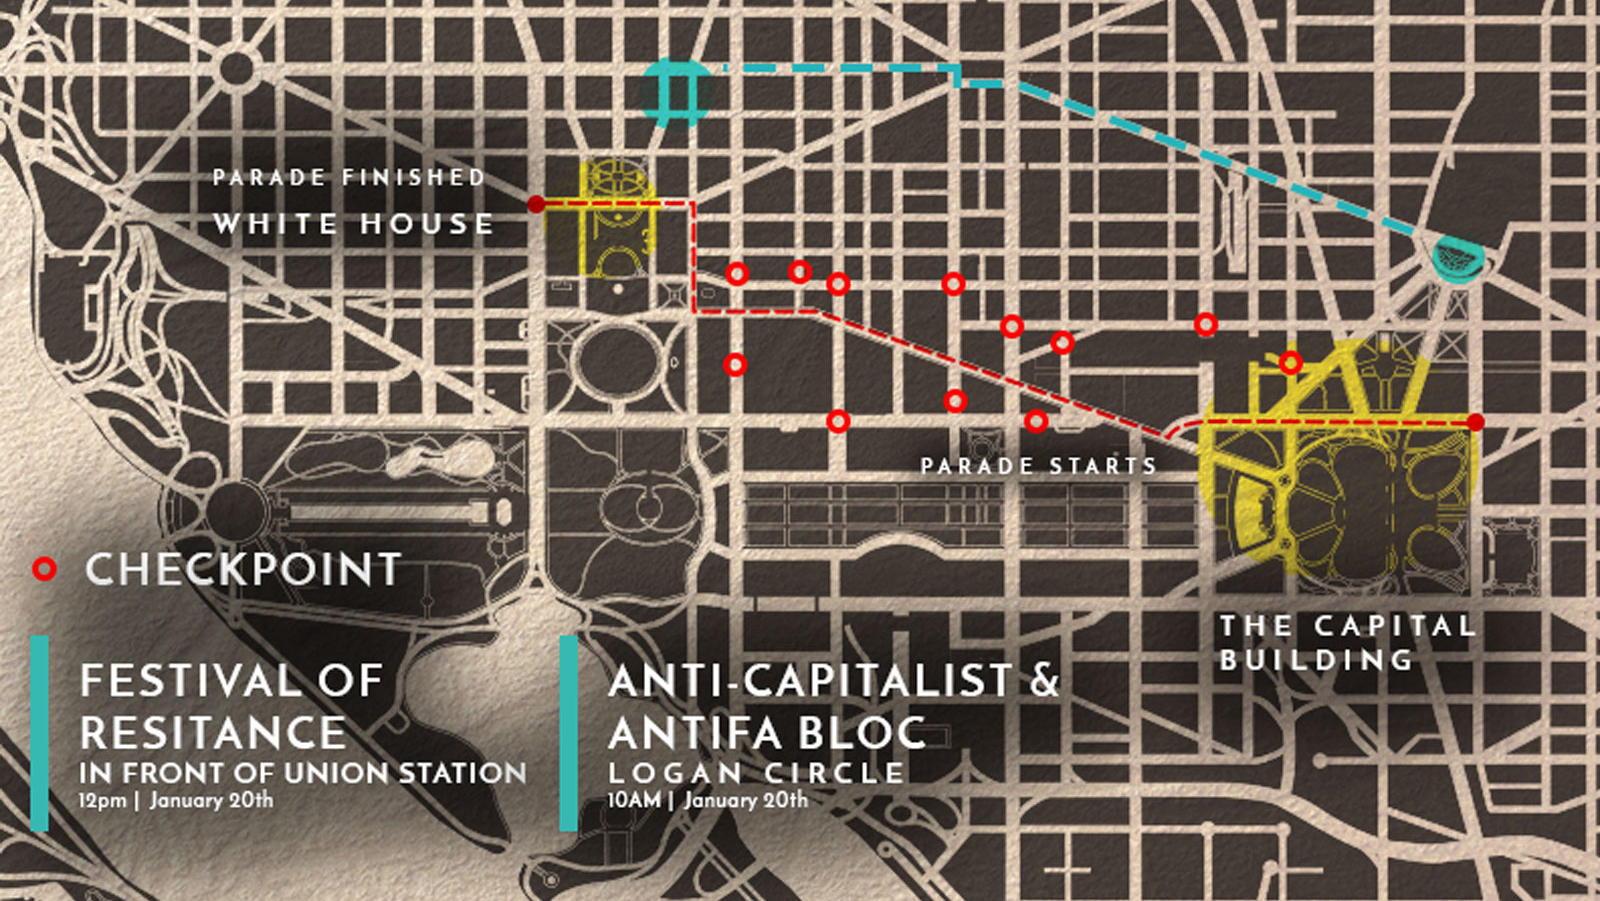 A map provided to Washington-bound protesters by the anti-Trump group Disrupt J20.